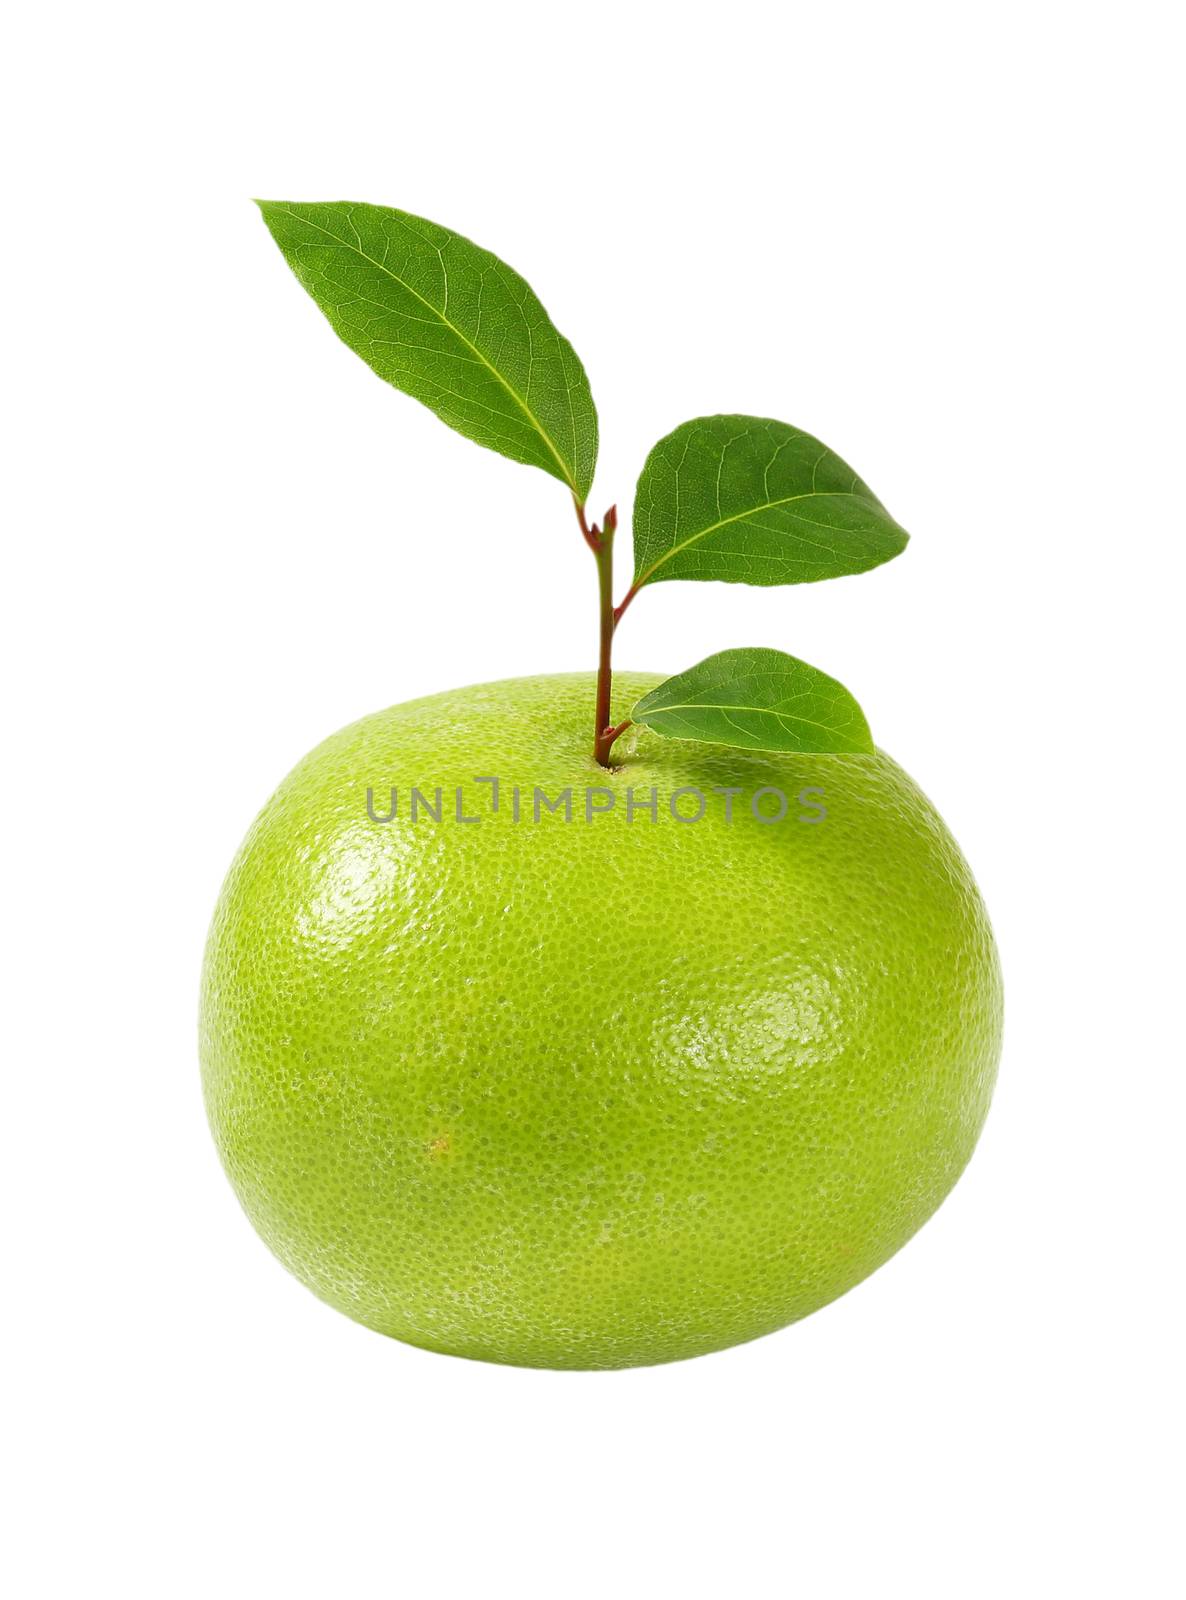 ripe green grapefruit with leaves on white background